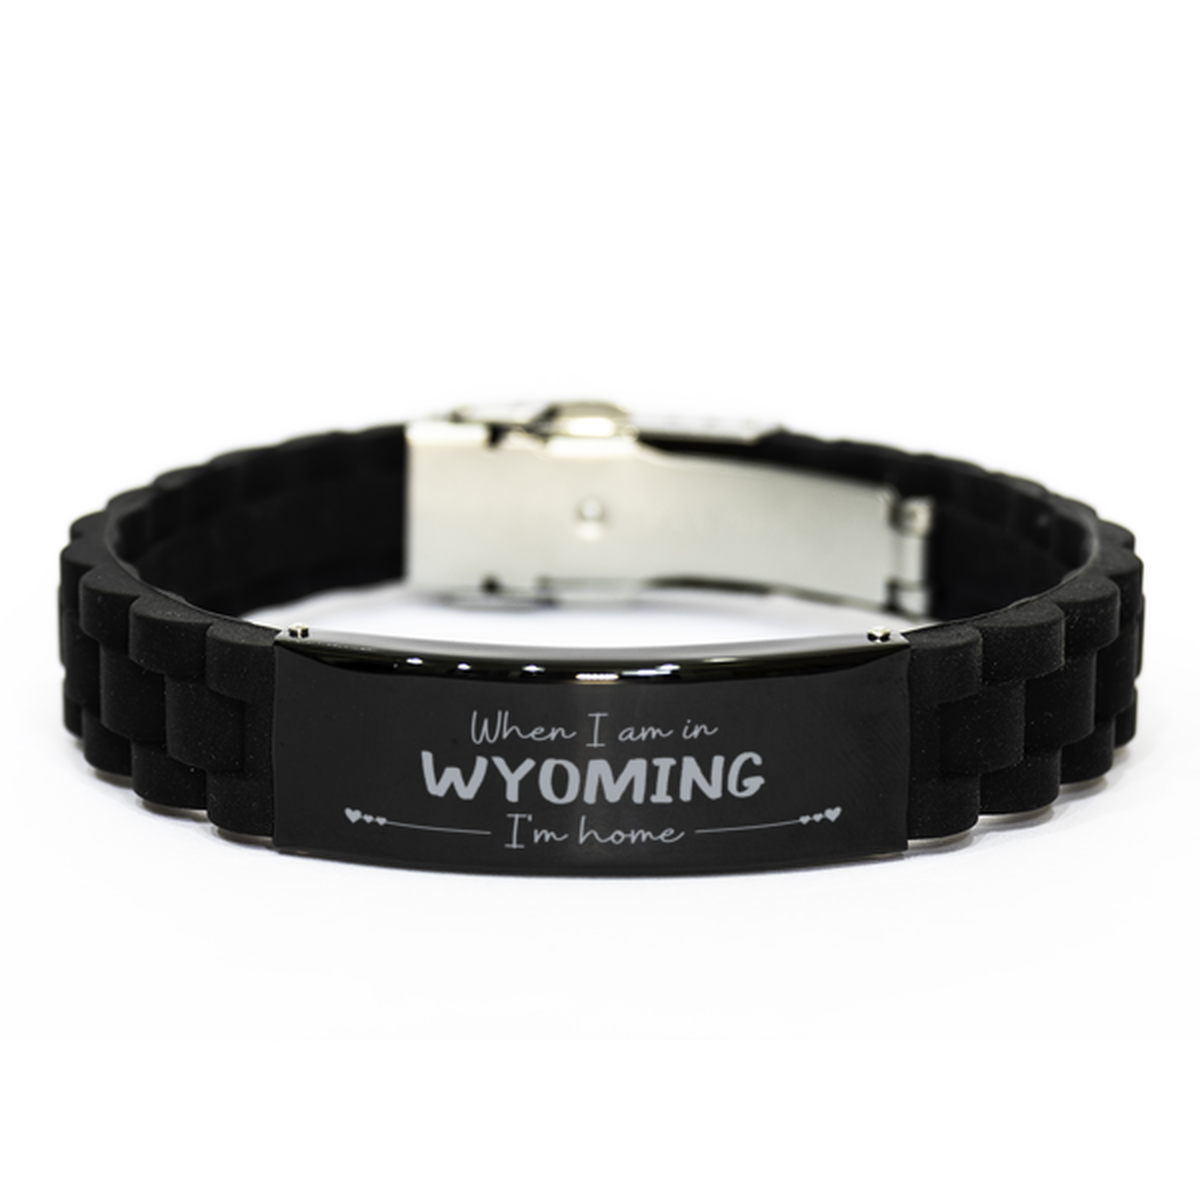 When I am in Wyoming I'm home Black Glidelock Clasp Bracelet, Cheap Gifts For Wyoming, State Wyoming Birthday Gifts for Friends Coworker